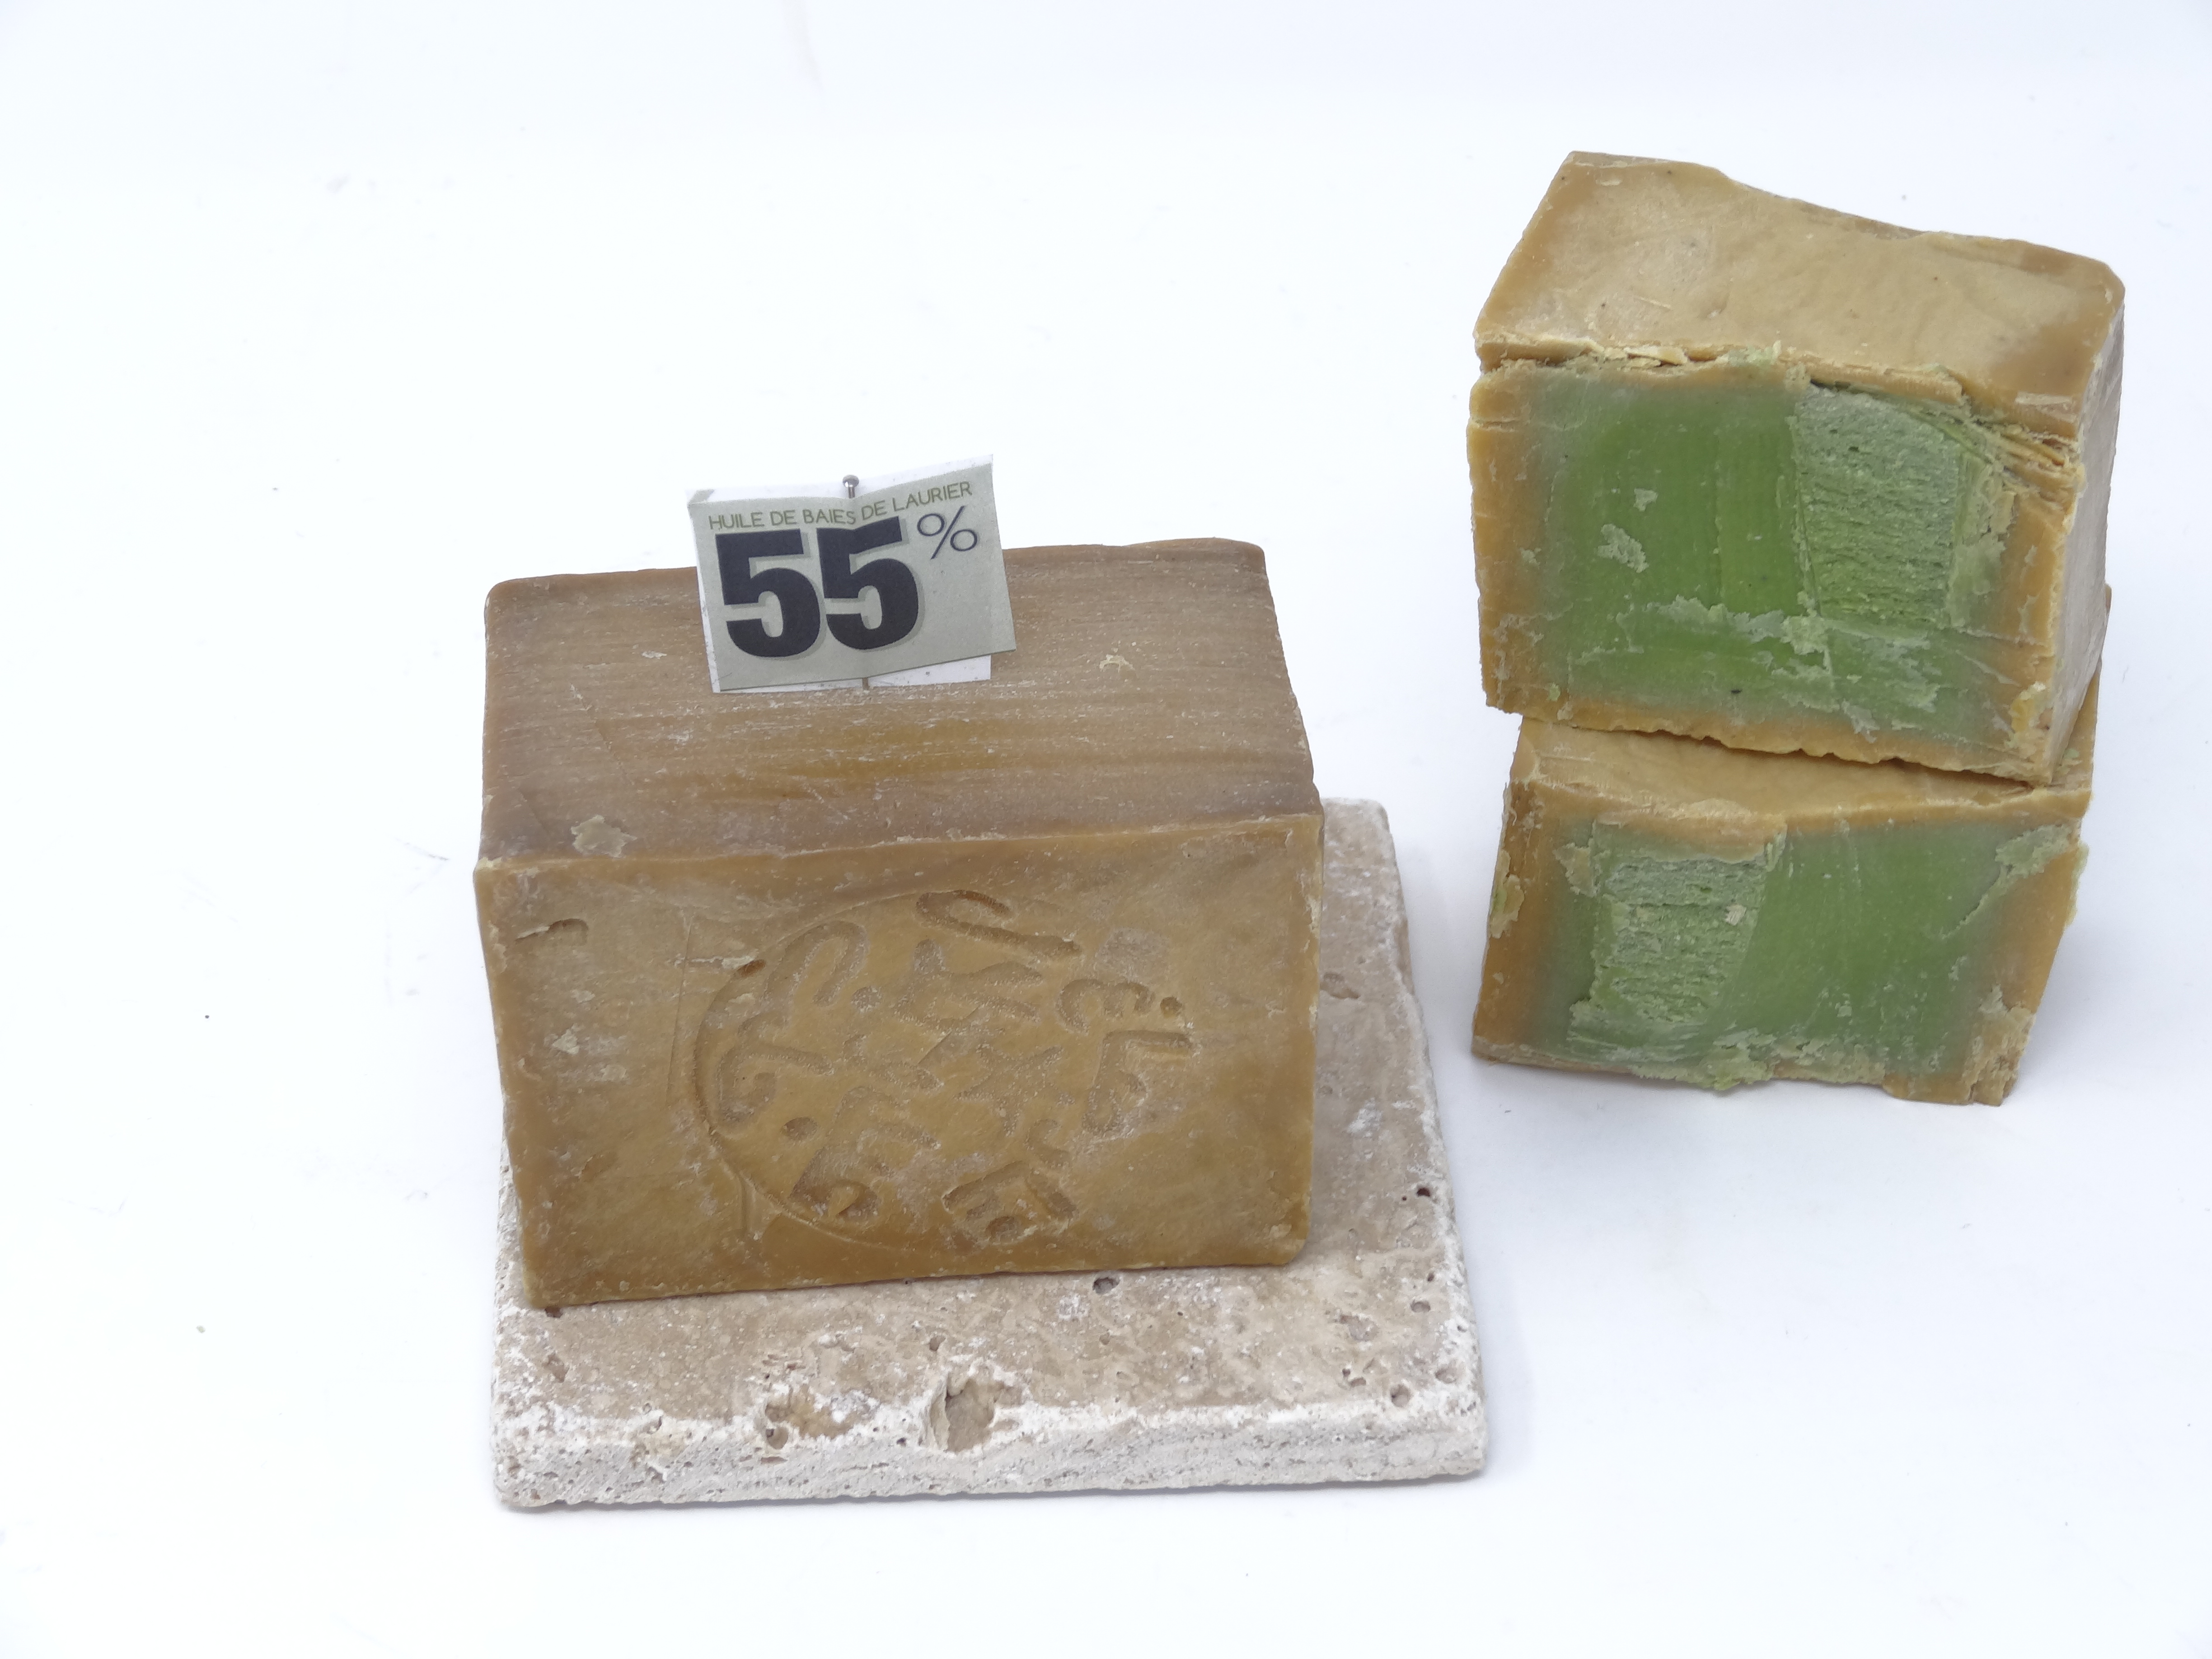 Aleppo soap with 55% Laurel fruit oil